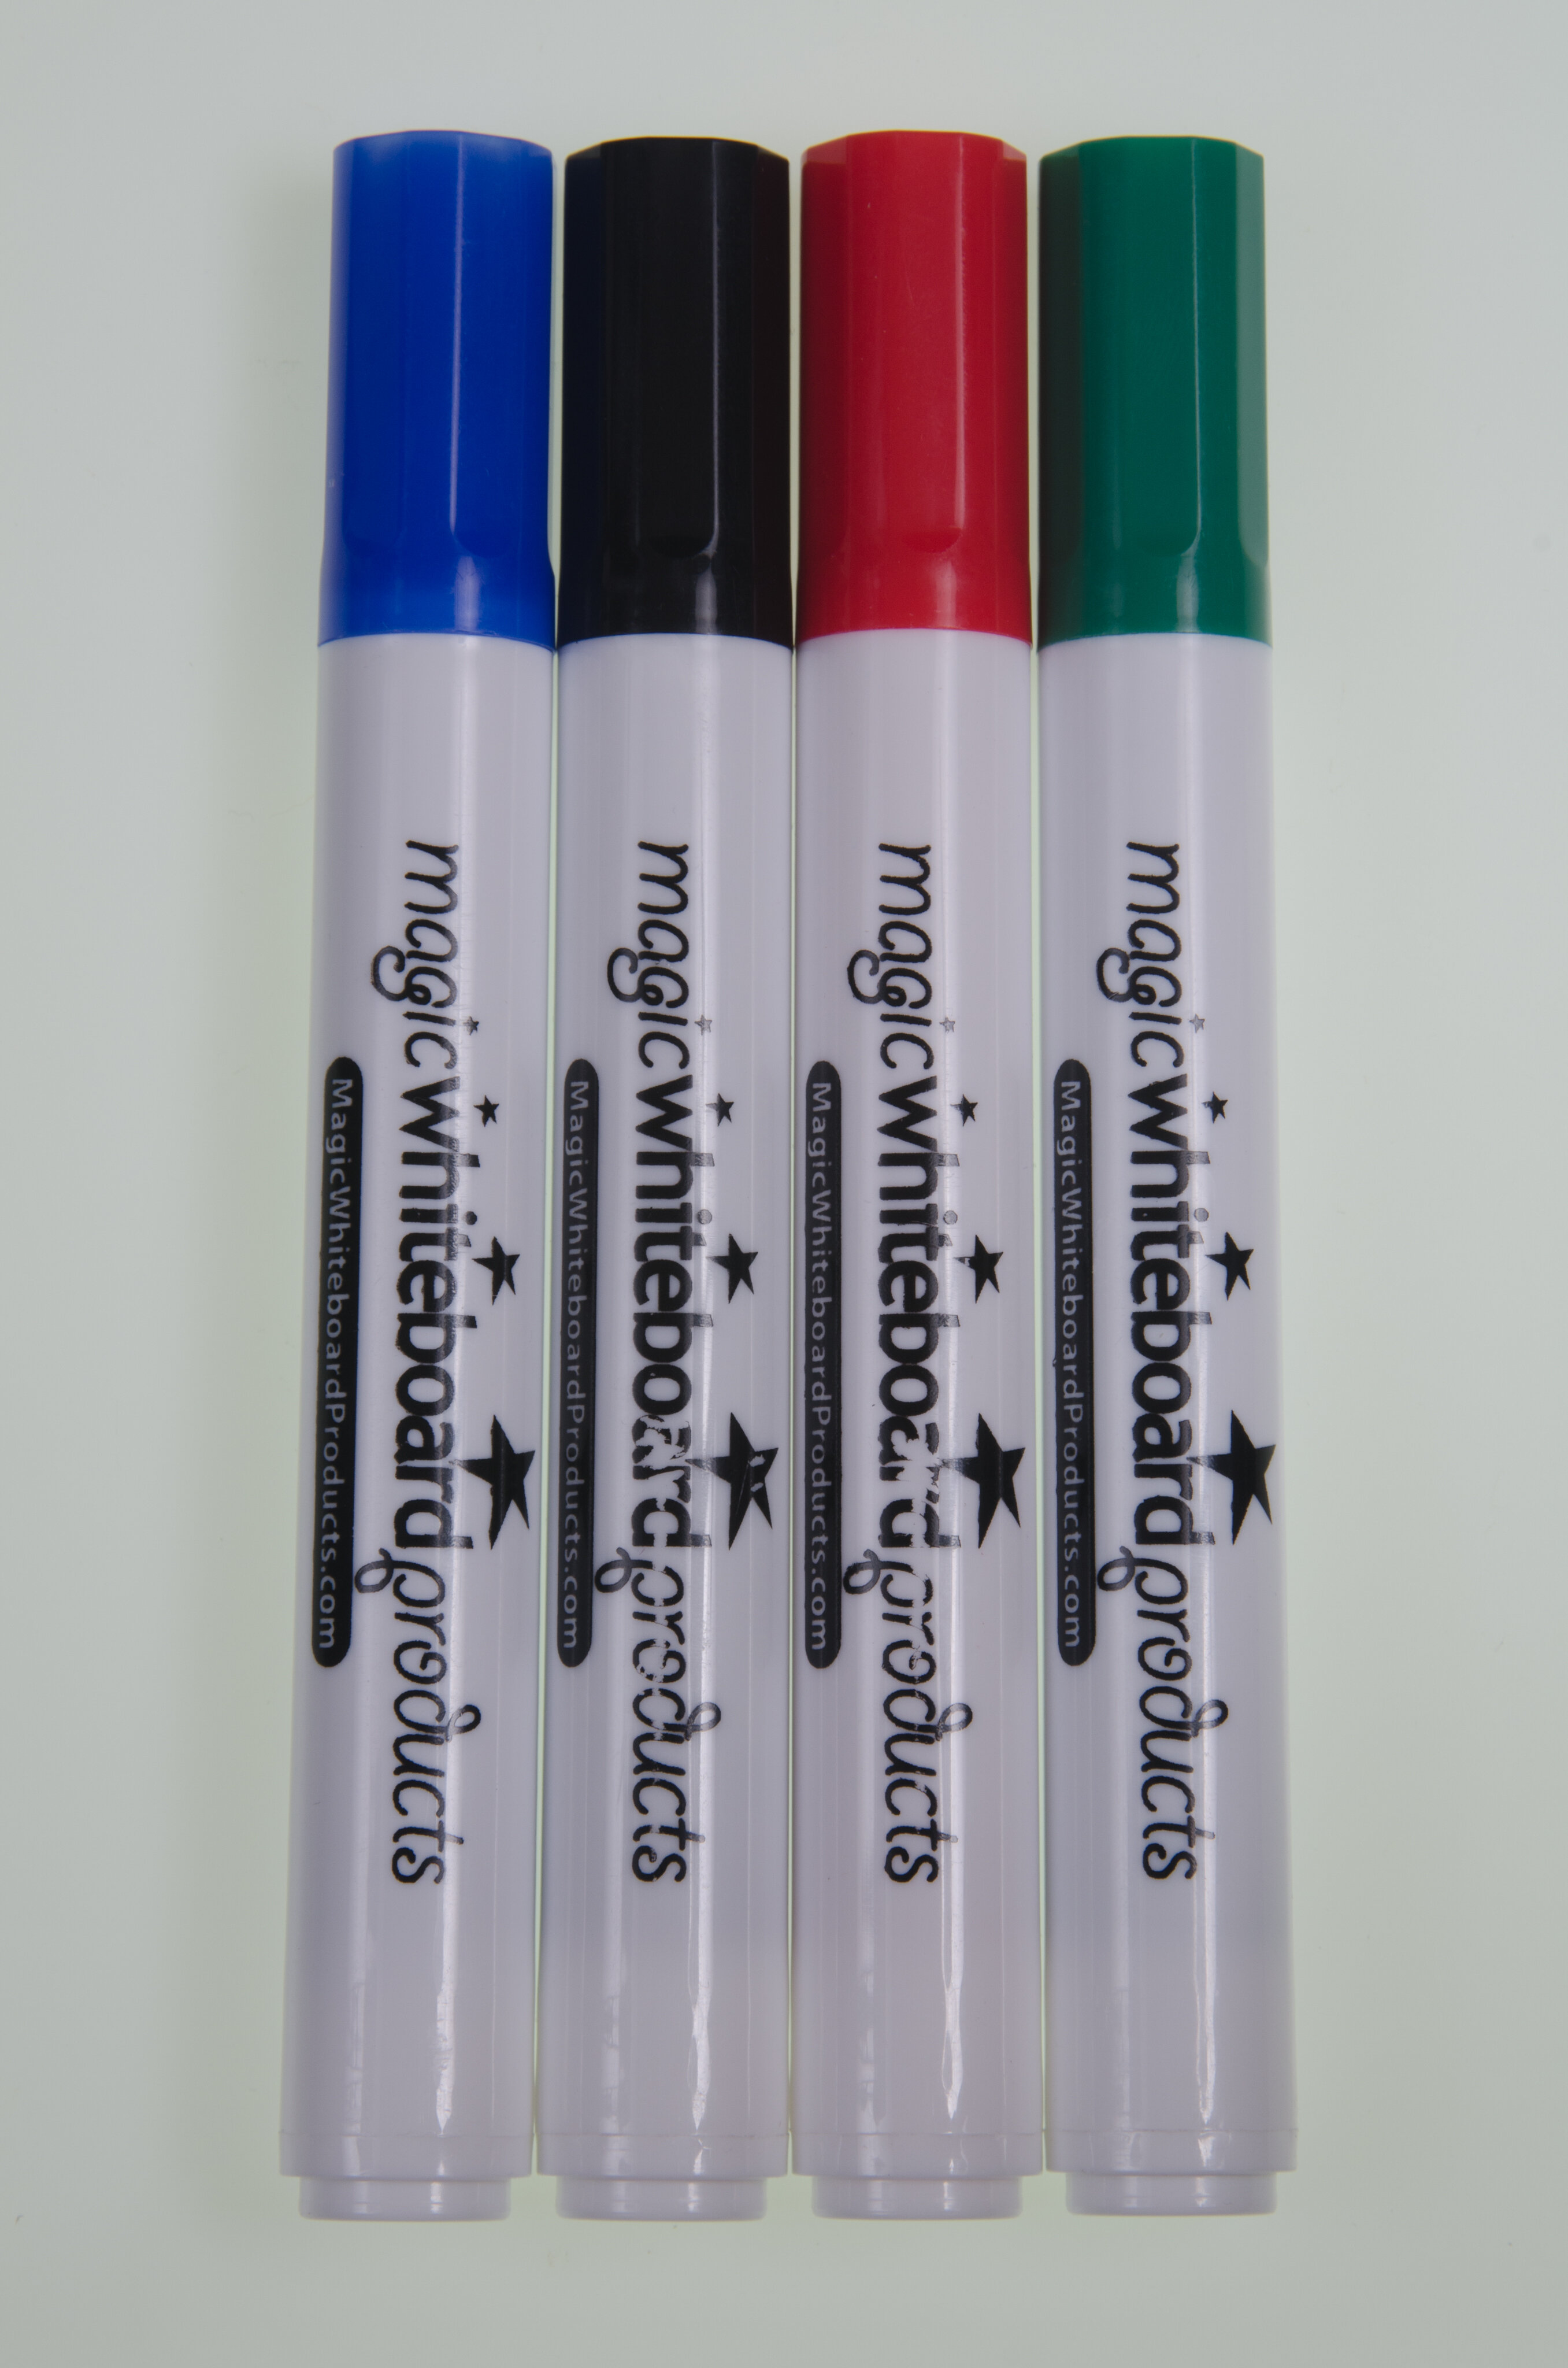 Magic Whiteboard Dry Erase Markers, BLACK BLUE GREEN RED, Low-Odor